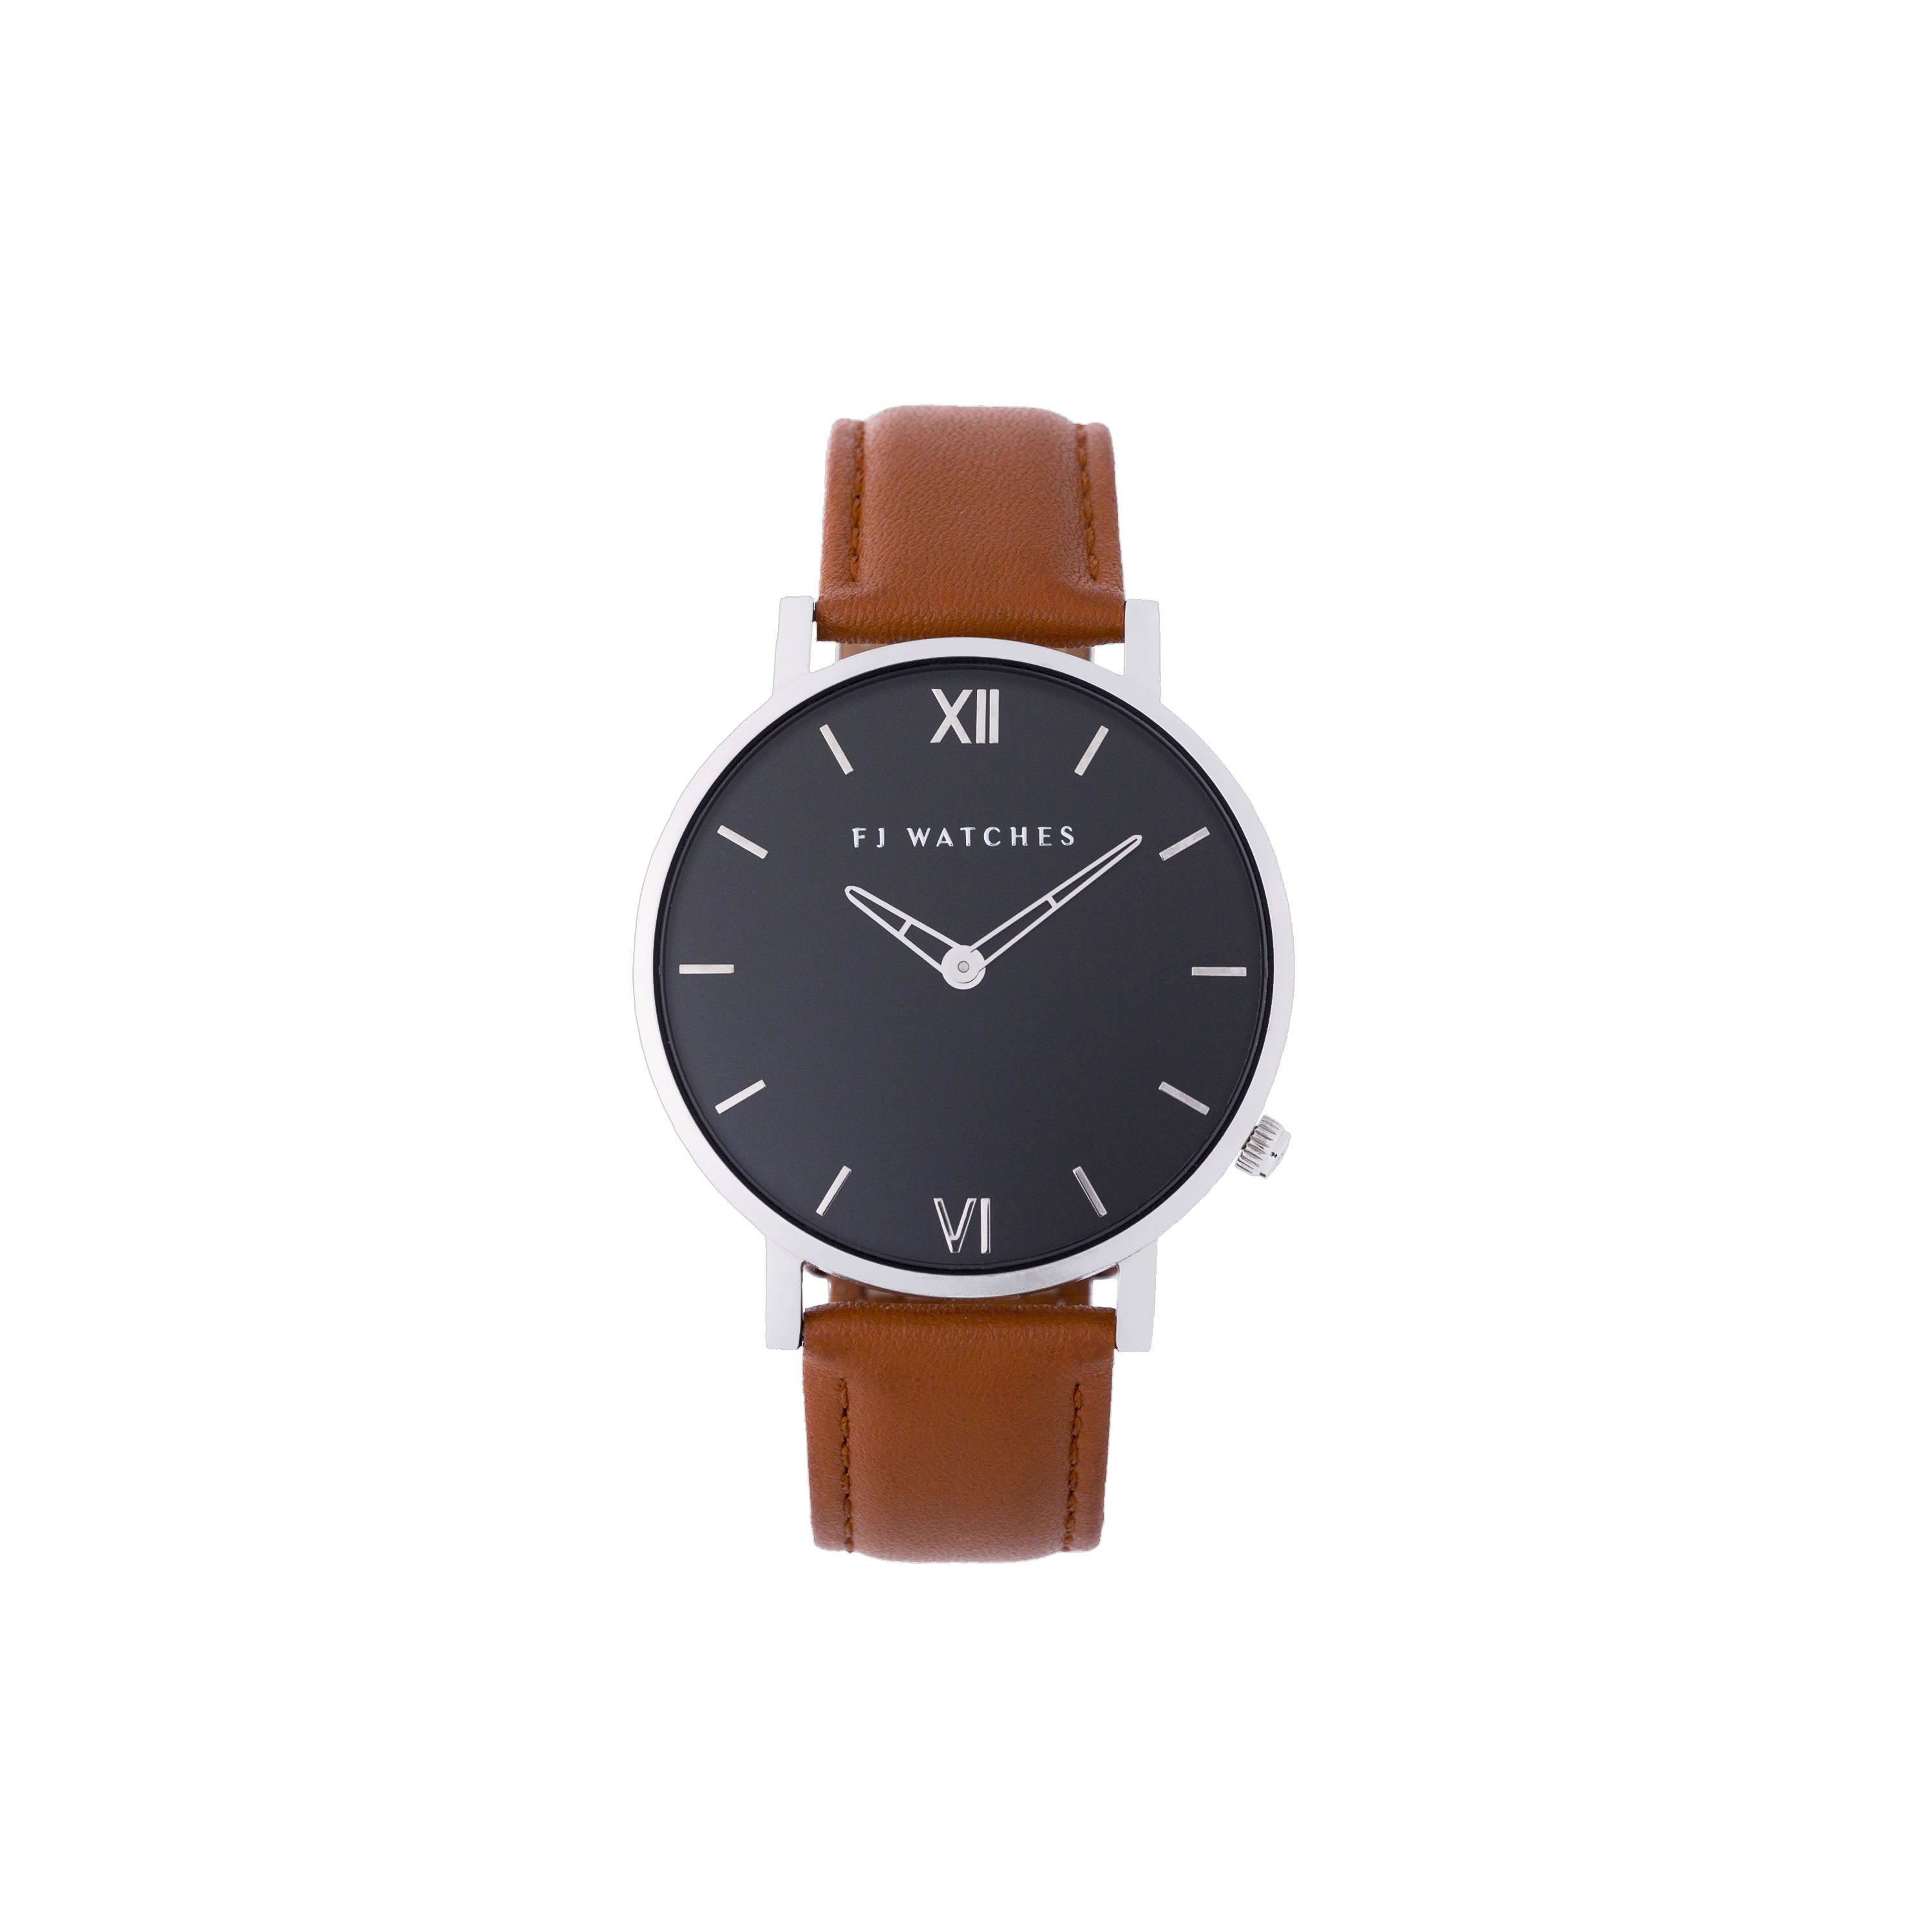 Discover Silver moon, a 36 mm women's watch from Five Jwlry with a black and silver dial. This one can be paired with a wide variety of leather colors, such as black, white, pink, red, blue, gray, tan, brown and beige!